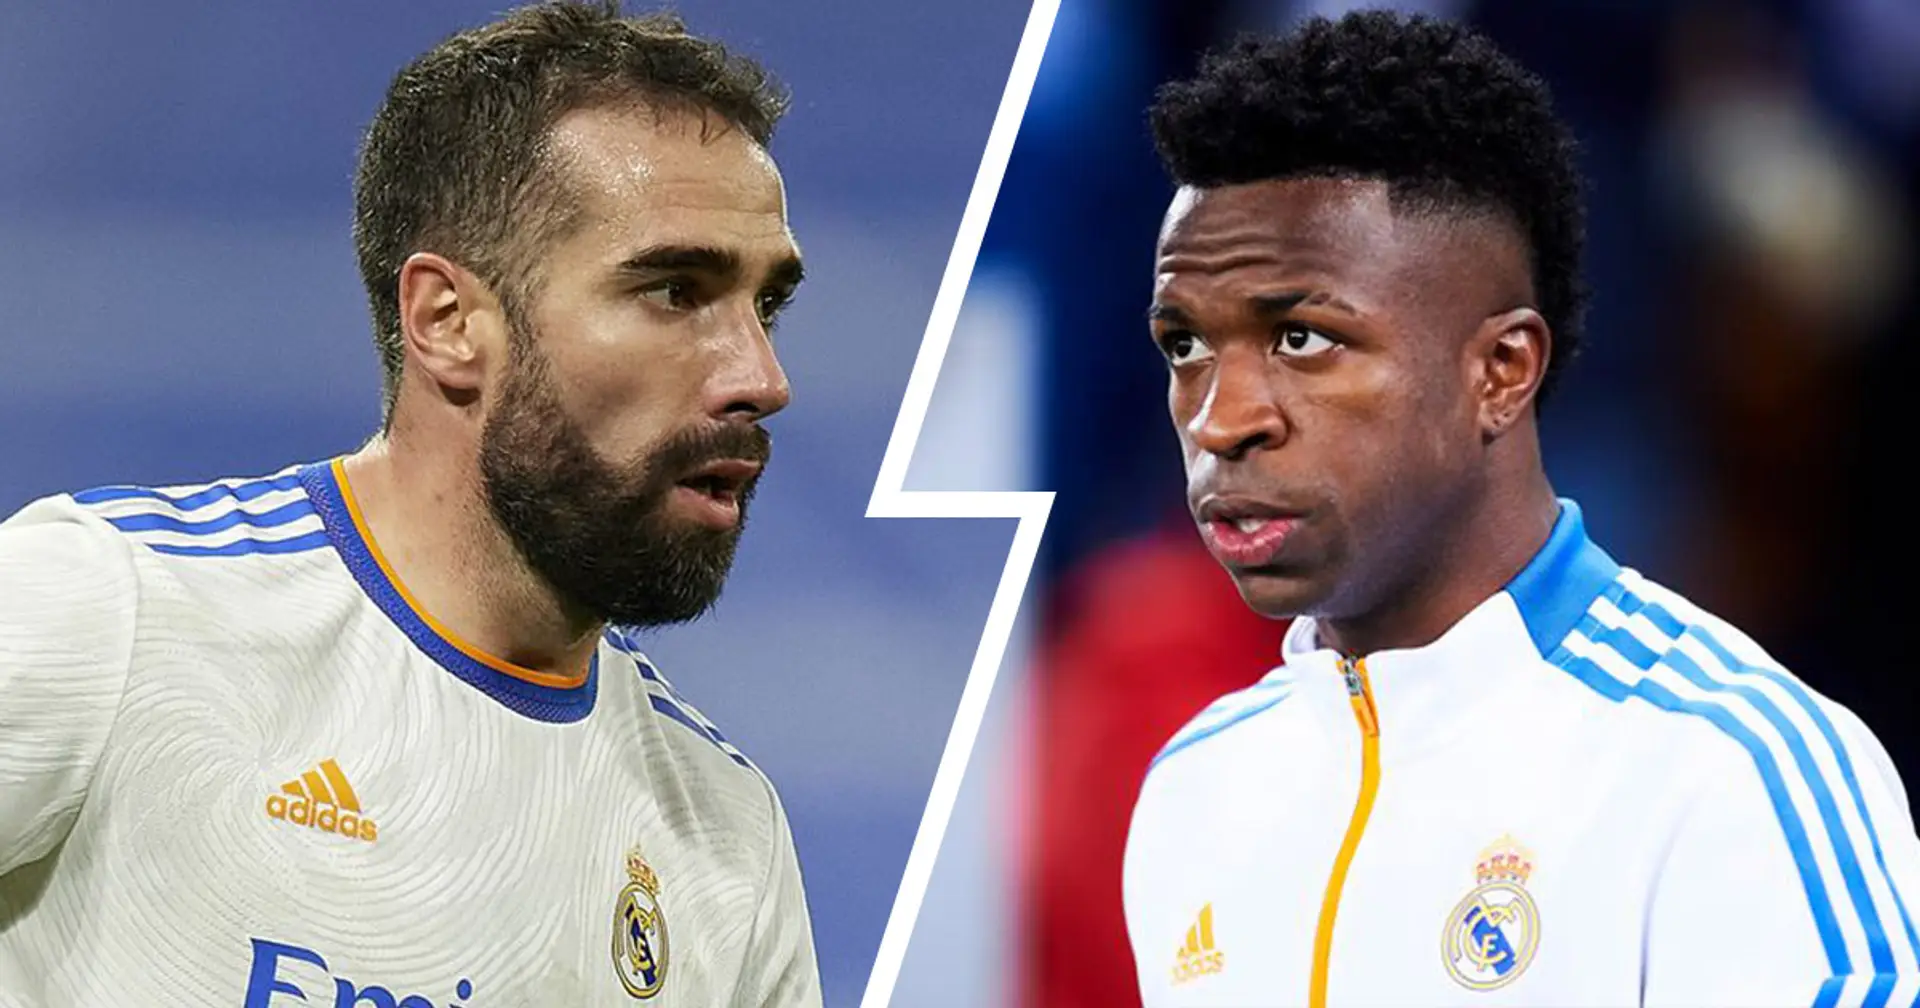 Latest on Vinicius Jr, Carvajal and others: Real Madrid injury update